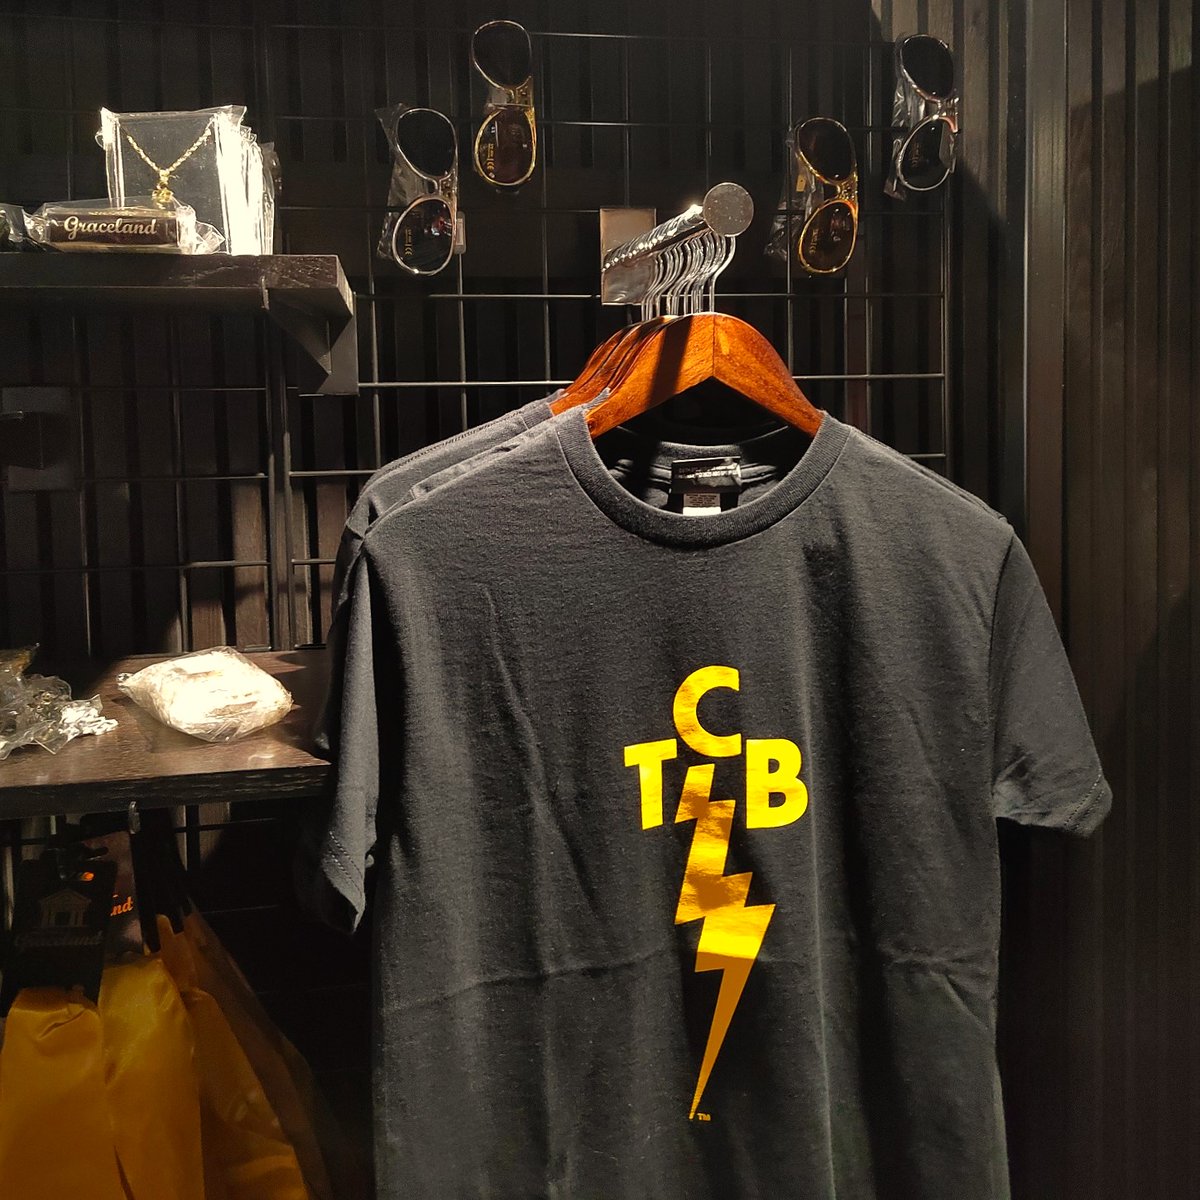 TCB: Taking Care of Business… ⚡ Here at Arches London Bridge, you can see some of Elvis’ original ‘TCB’ items throughout our ‘Direct from Graceland: Elvis’ exhibition, as well as shop ‘TCB’ branded merch in our gift shop. #tcb #takingcareofbusiness